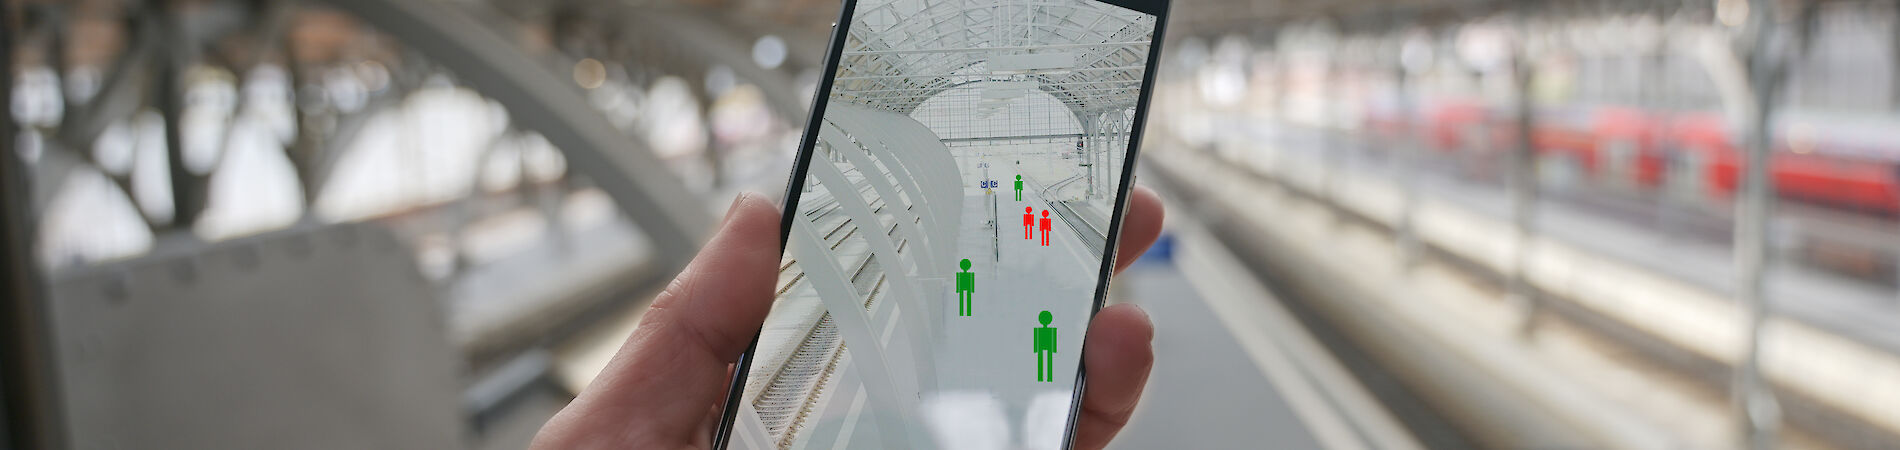 Hand holds smartphone, on the display are green and red colored graphics of people. In the background a train station is blurred.